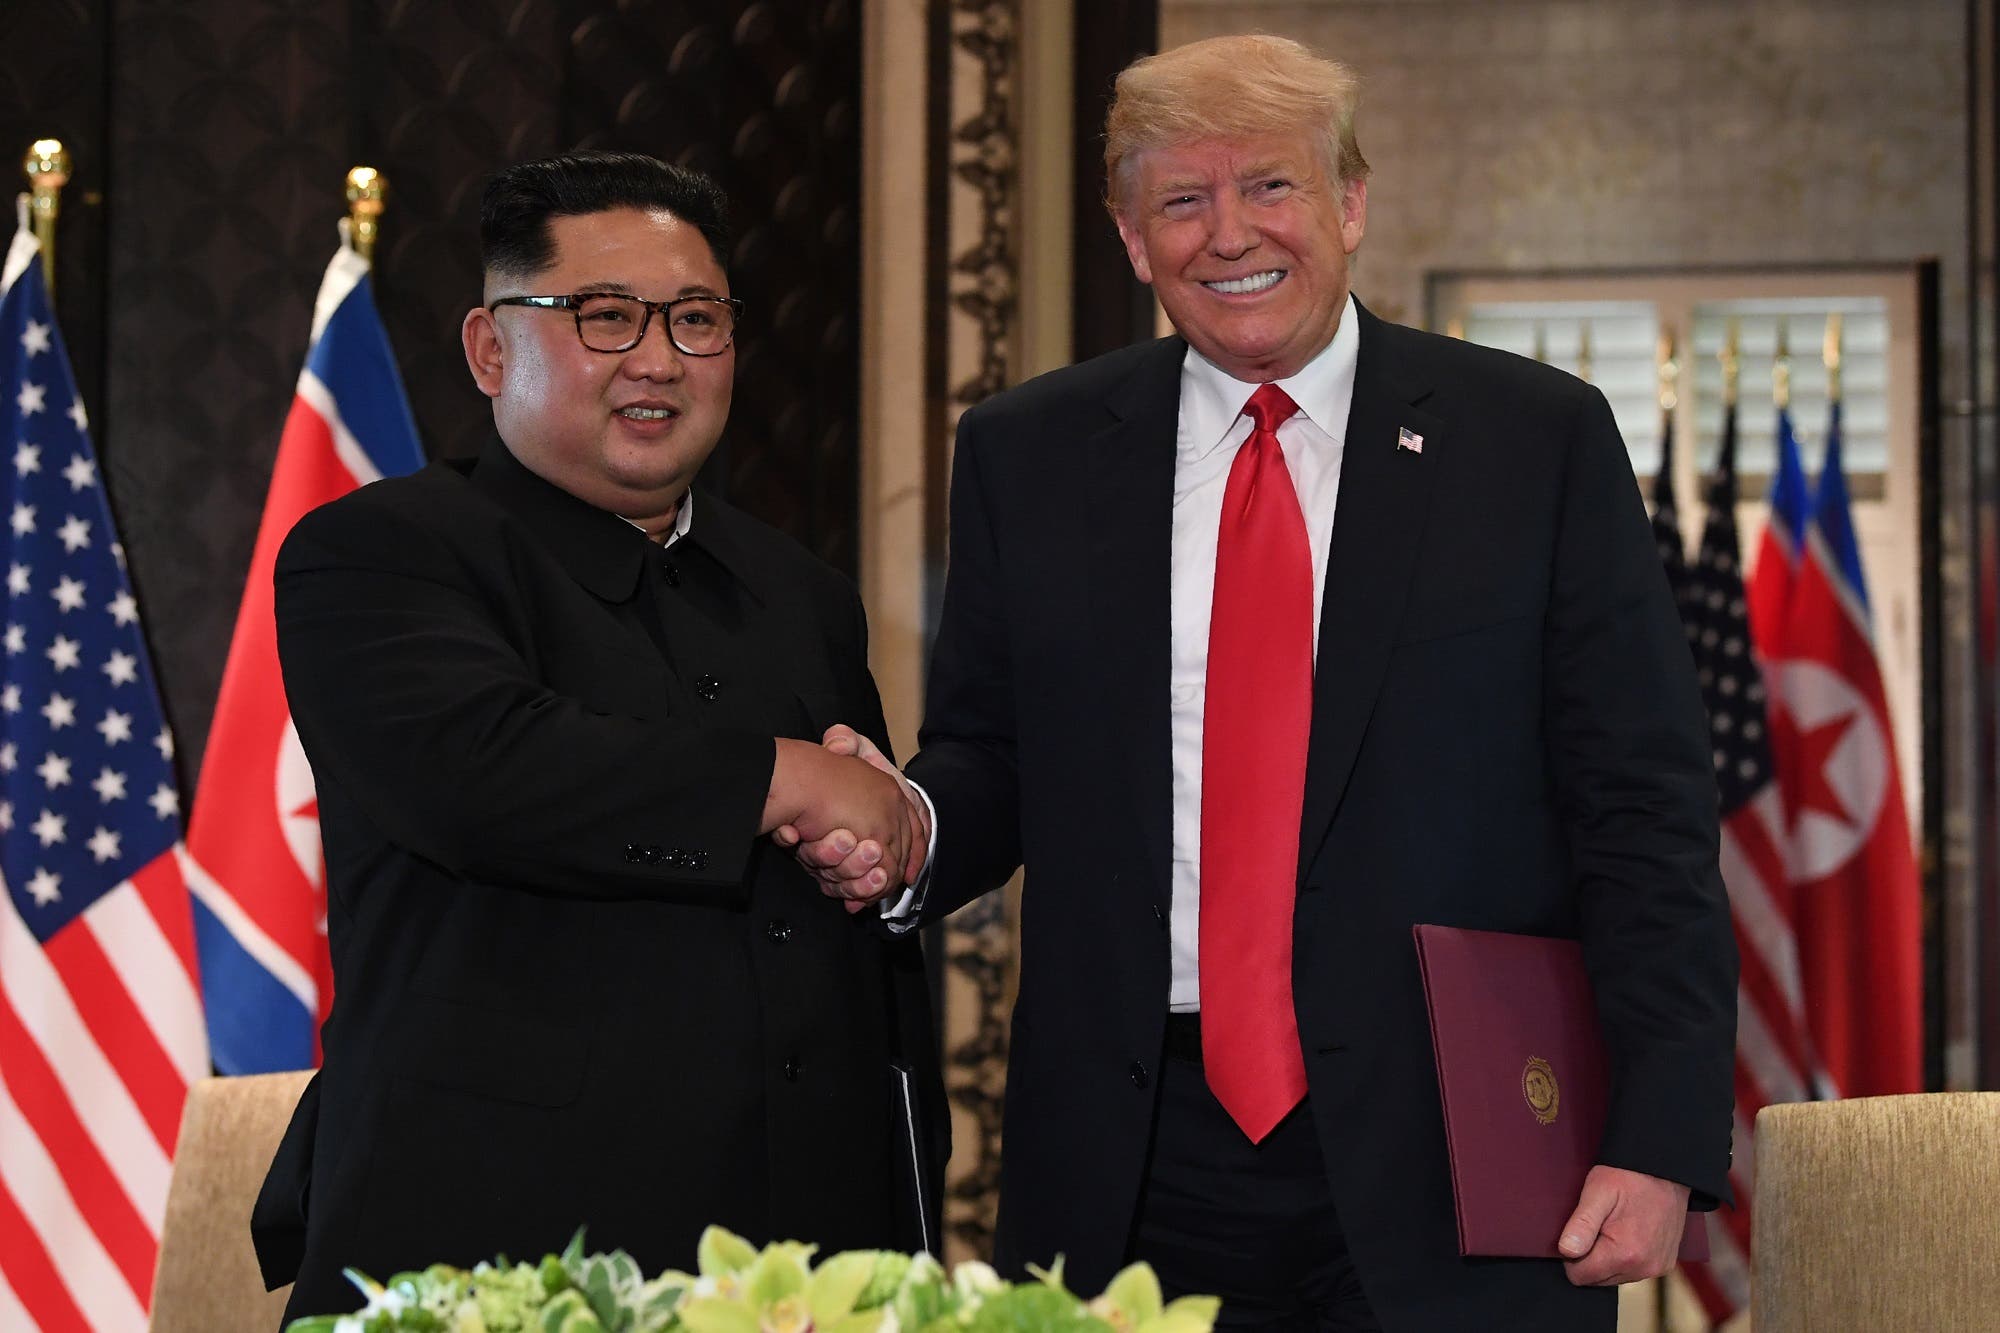 President Trump and Kim Jong Un shake hands following the signing ceremony in Singapore on June 12, 2018. (AFP)